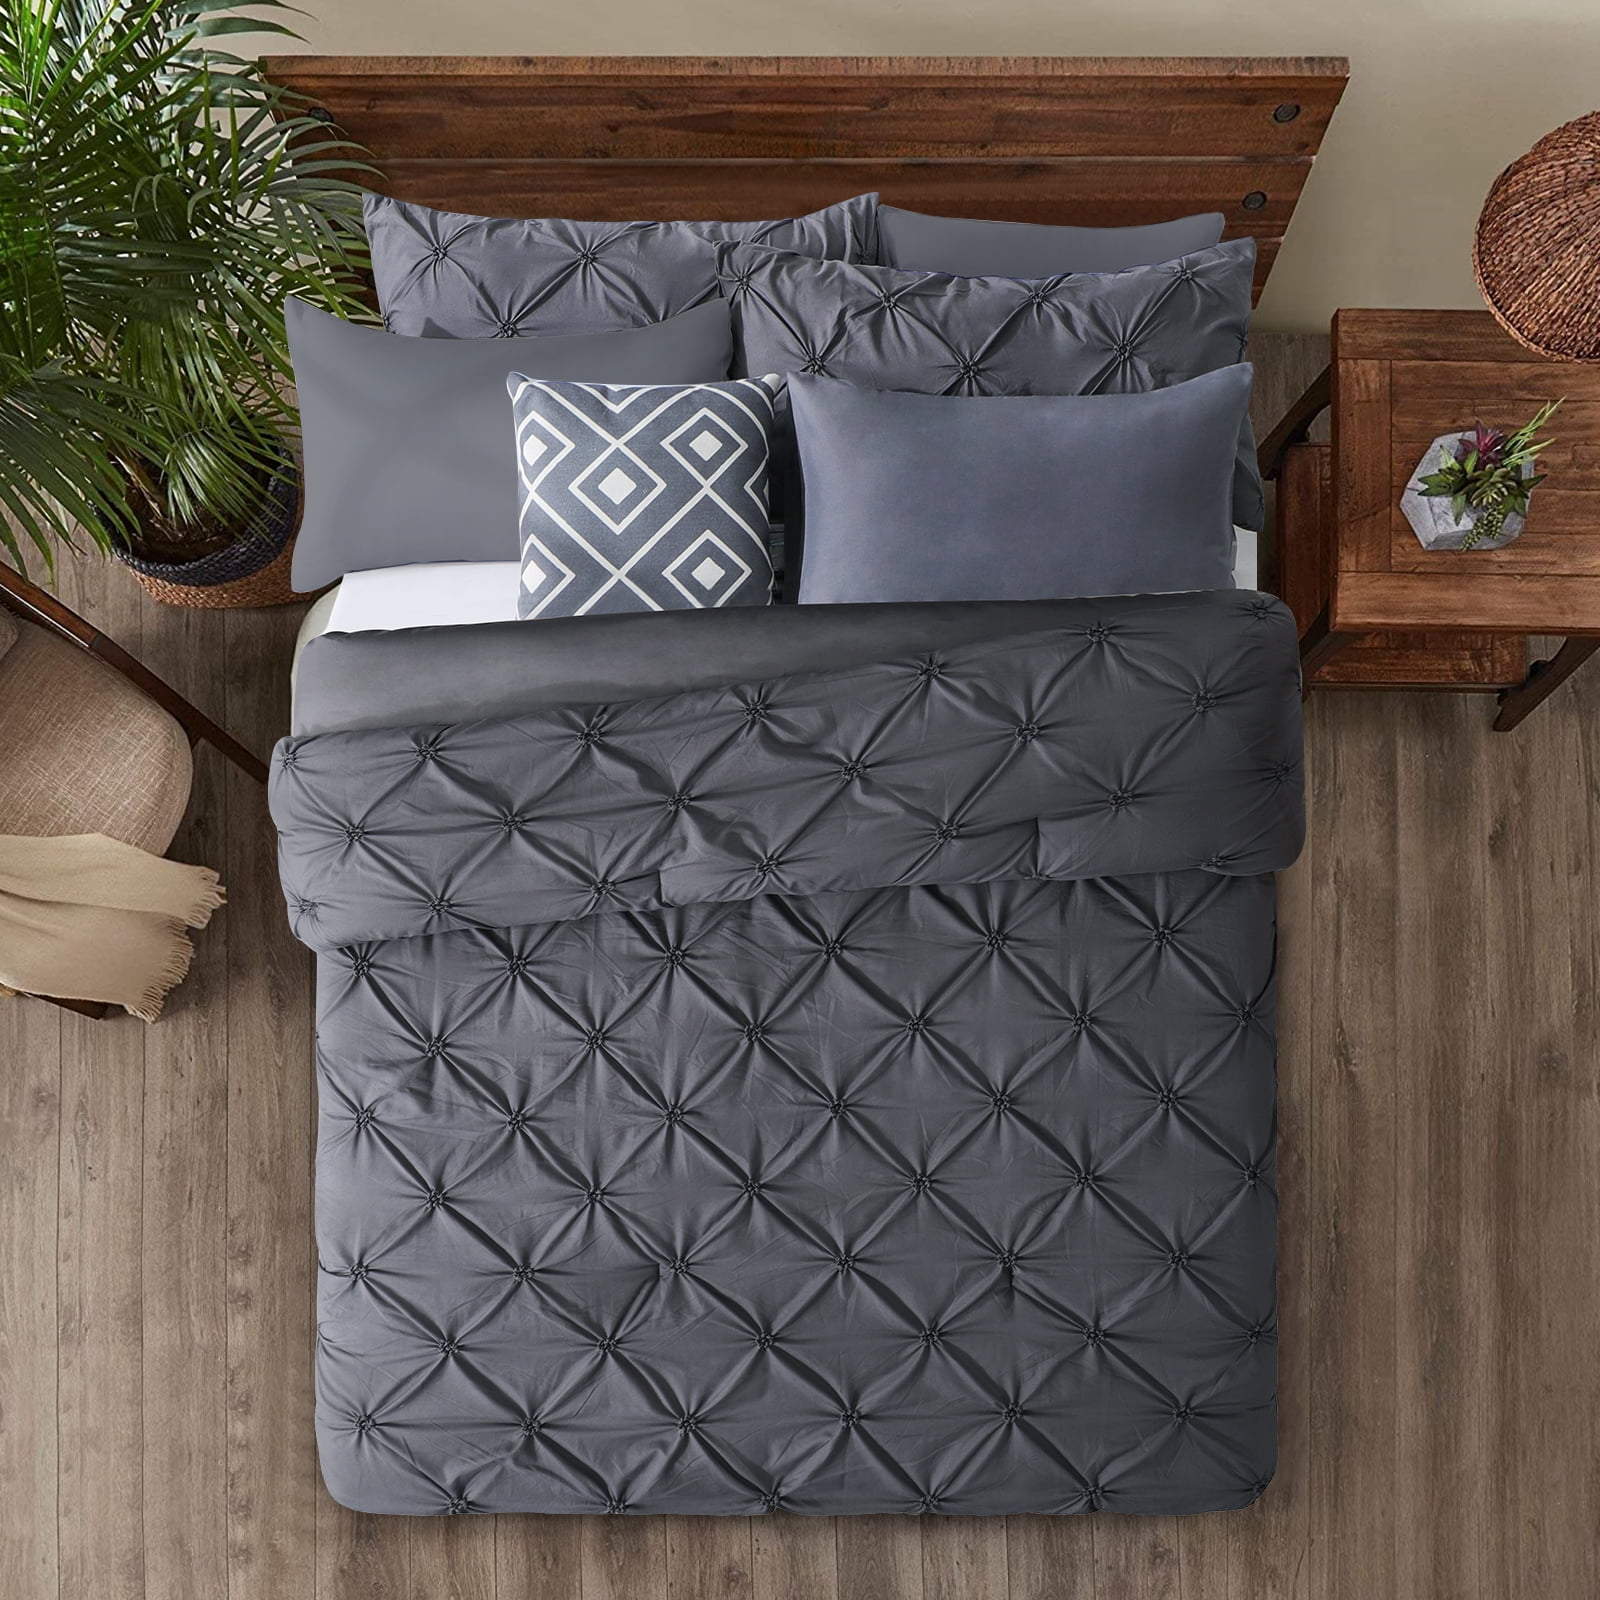 CozyLux King Size Comforter Set - 3 Pieces Grey Soft Luxury Cationic Dyeing  Bedding Comforter for All Season, Gray Breathable Lightweight Fluffy Bed